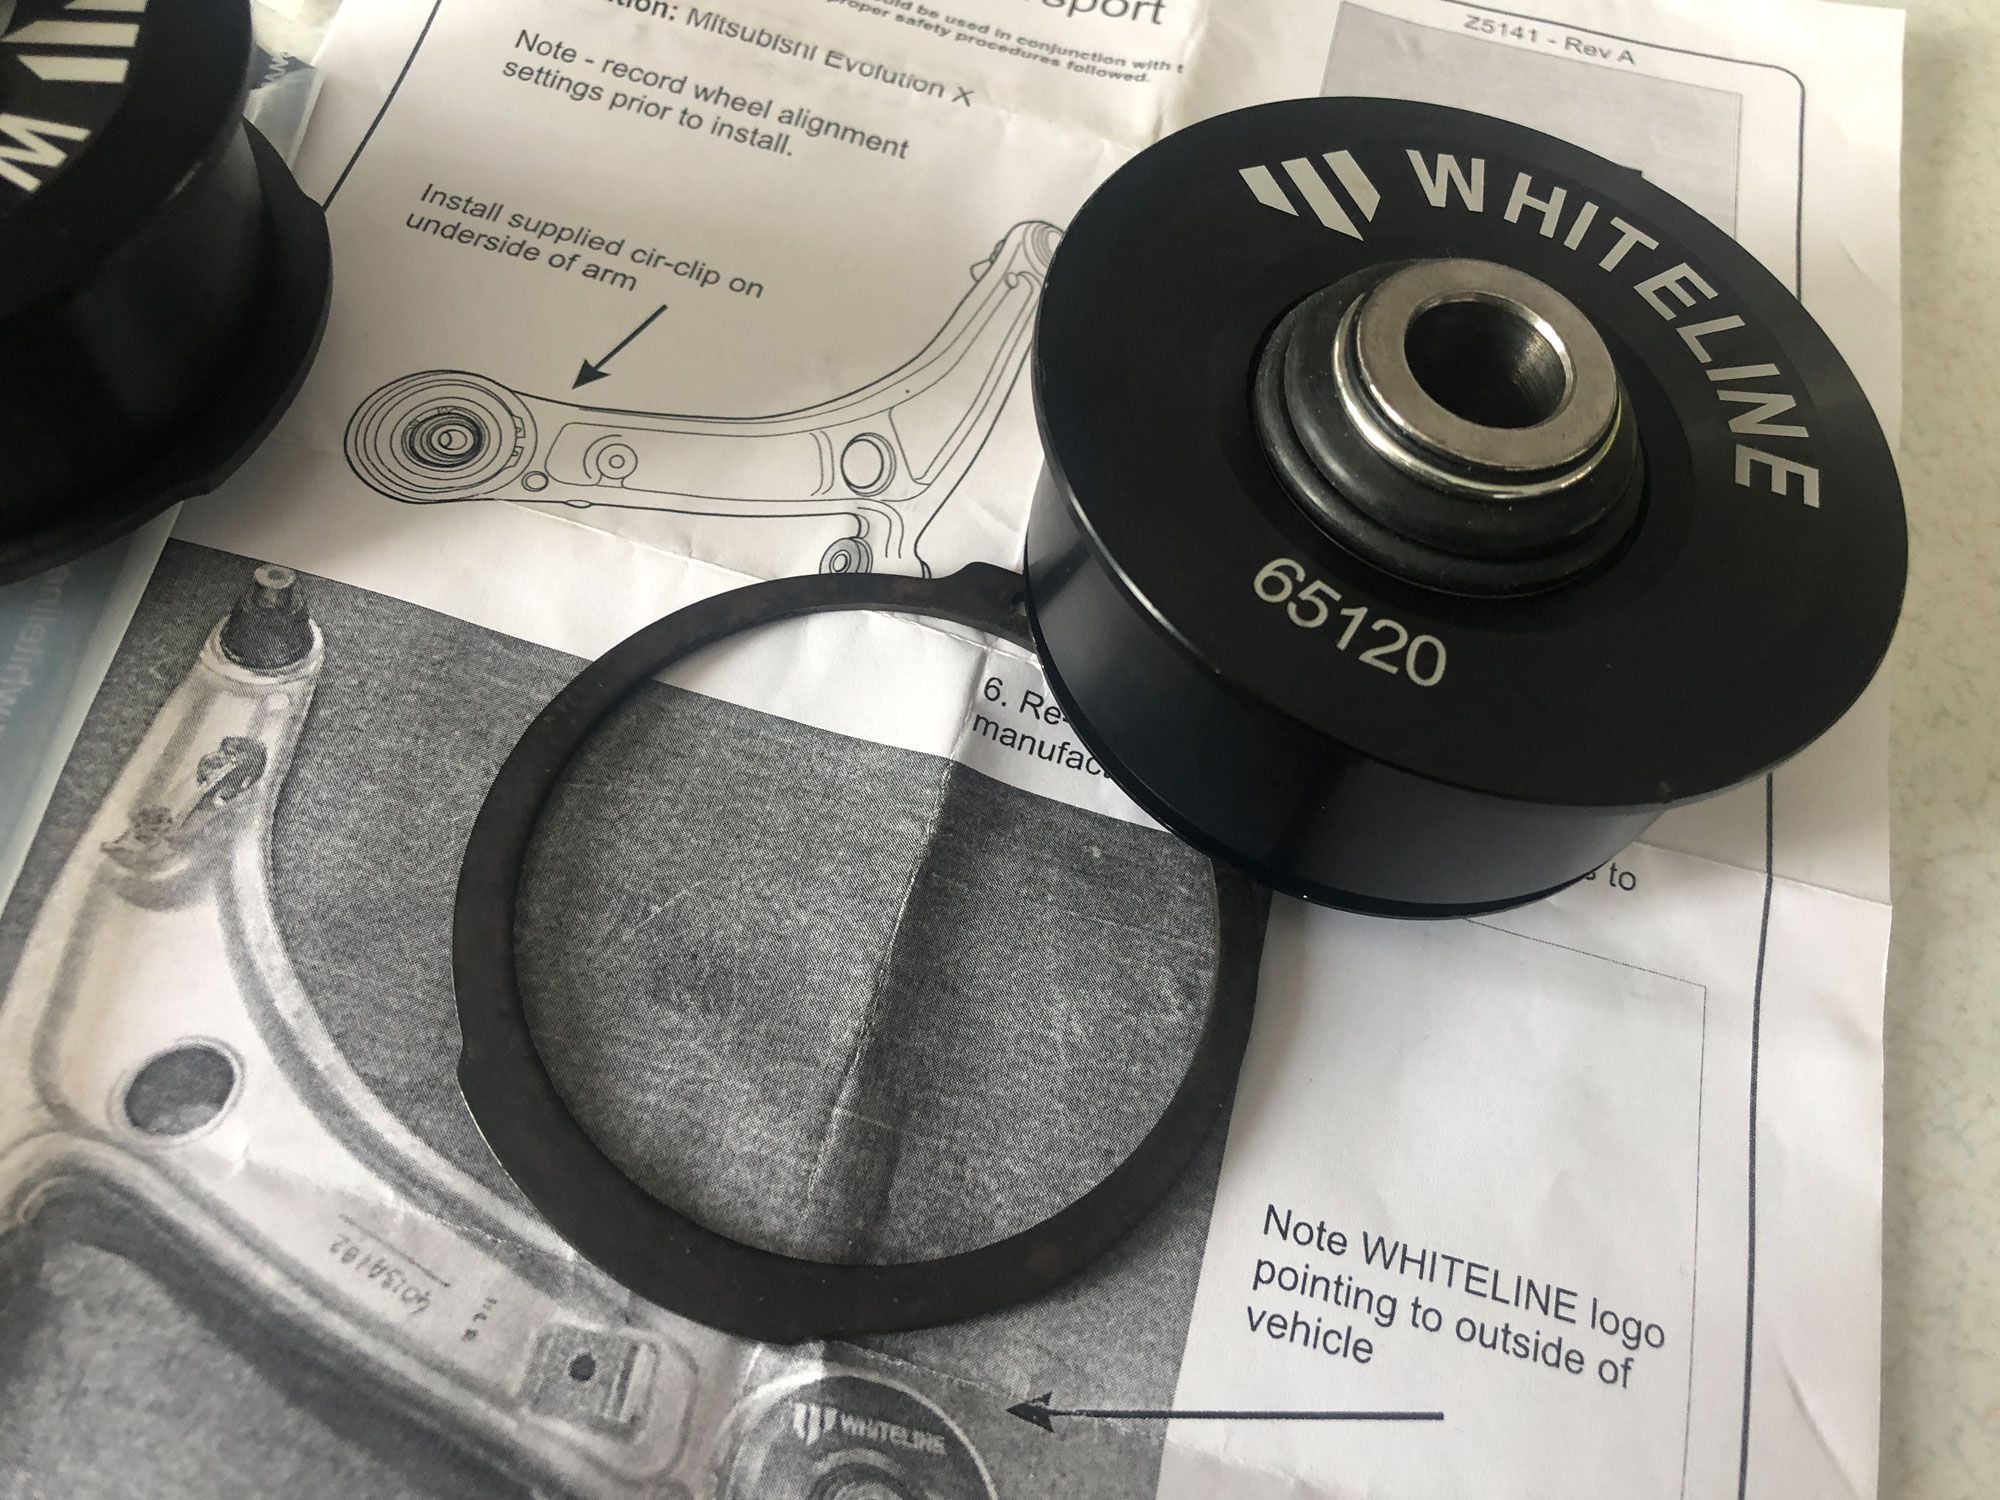 Steering/Suspension - Whiteline Lower Control Arm Bushings KCA400M - New - Green Bay, WI 54313, United States